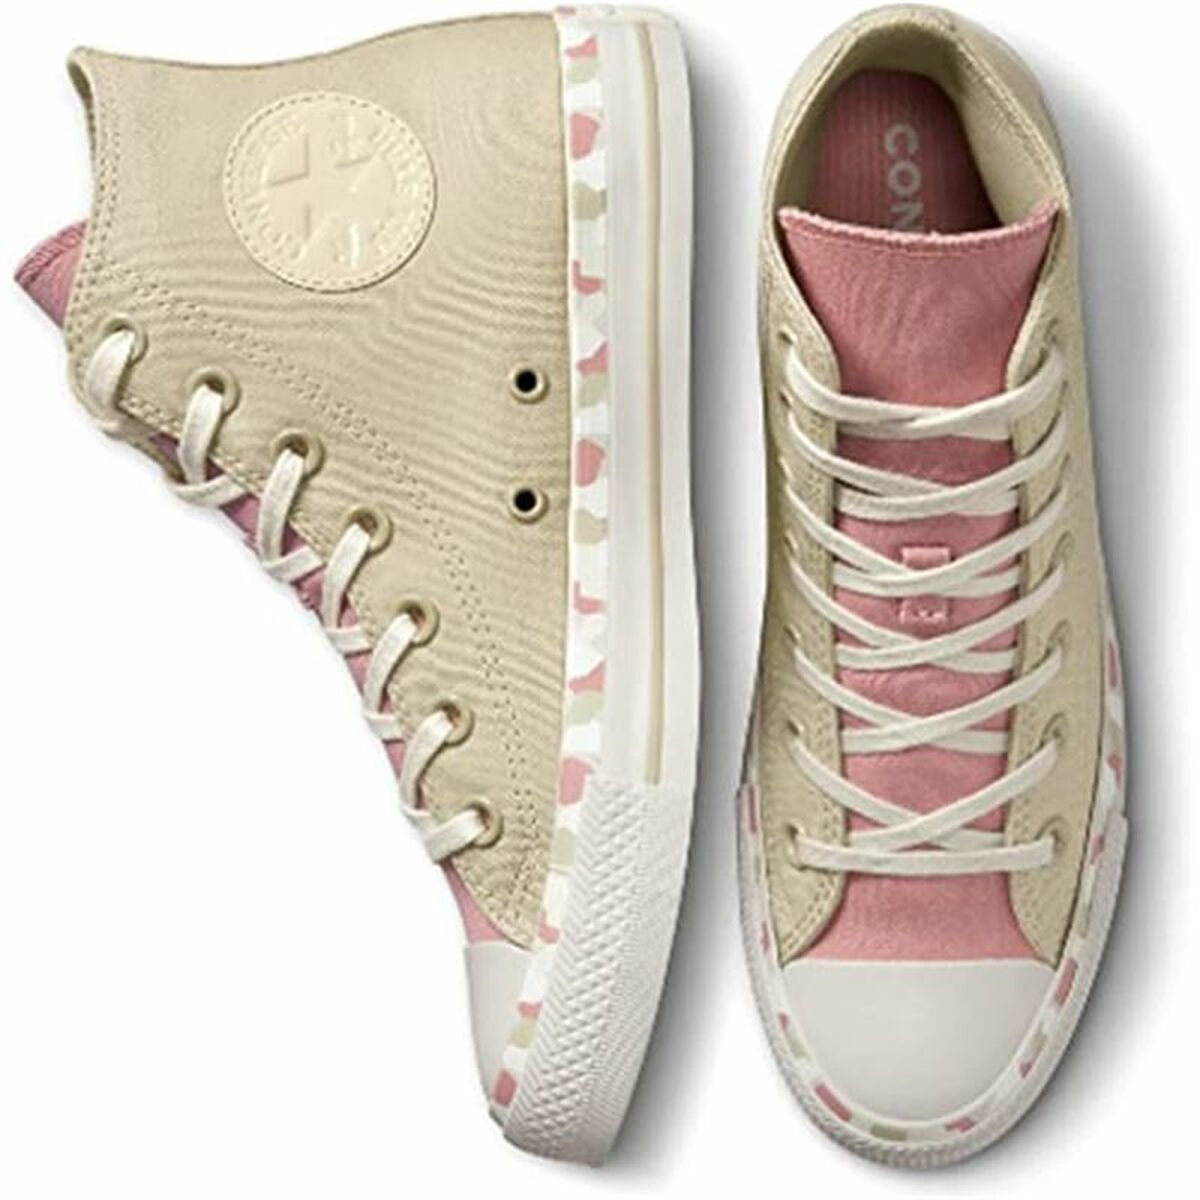 Women's Casual Trainers Converse All Star Beige UrbanHeer